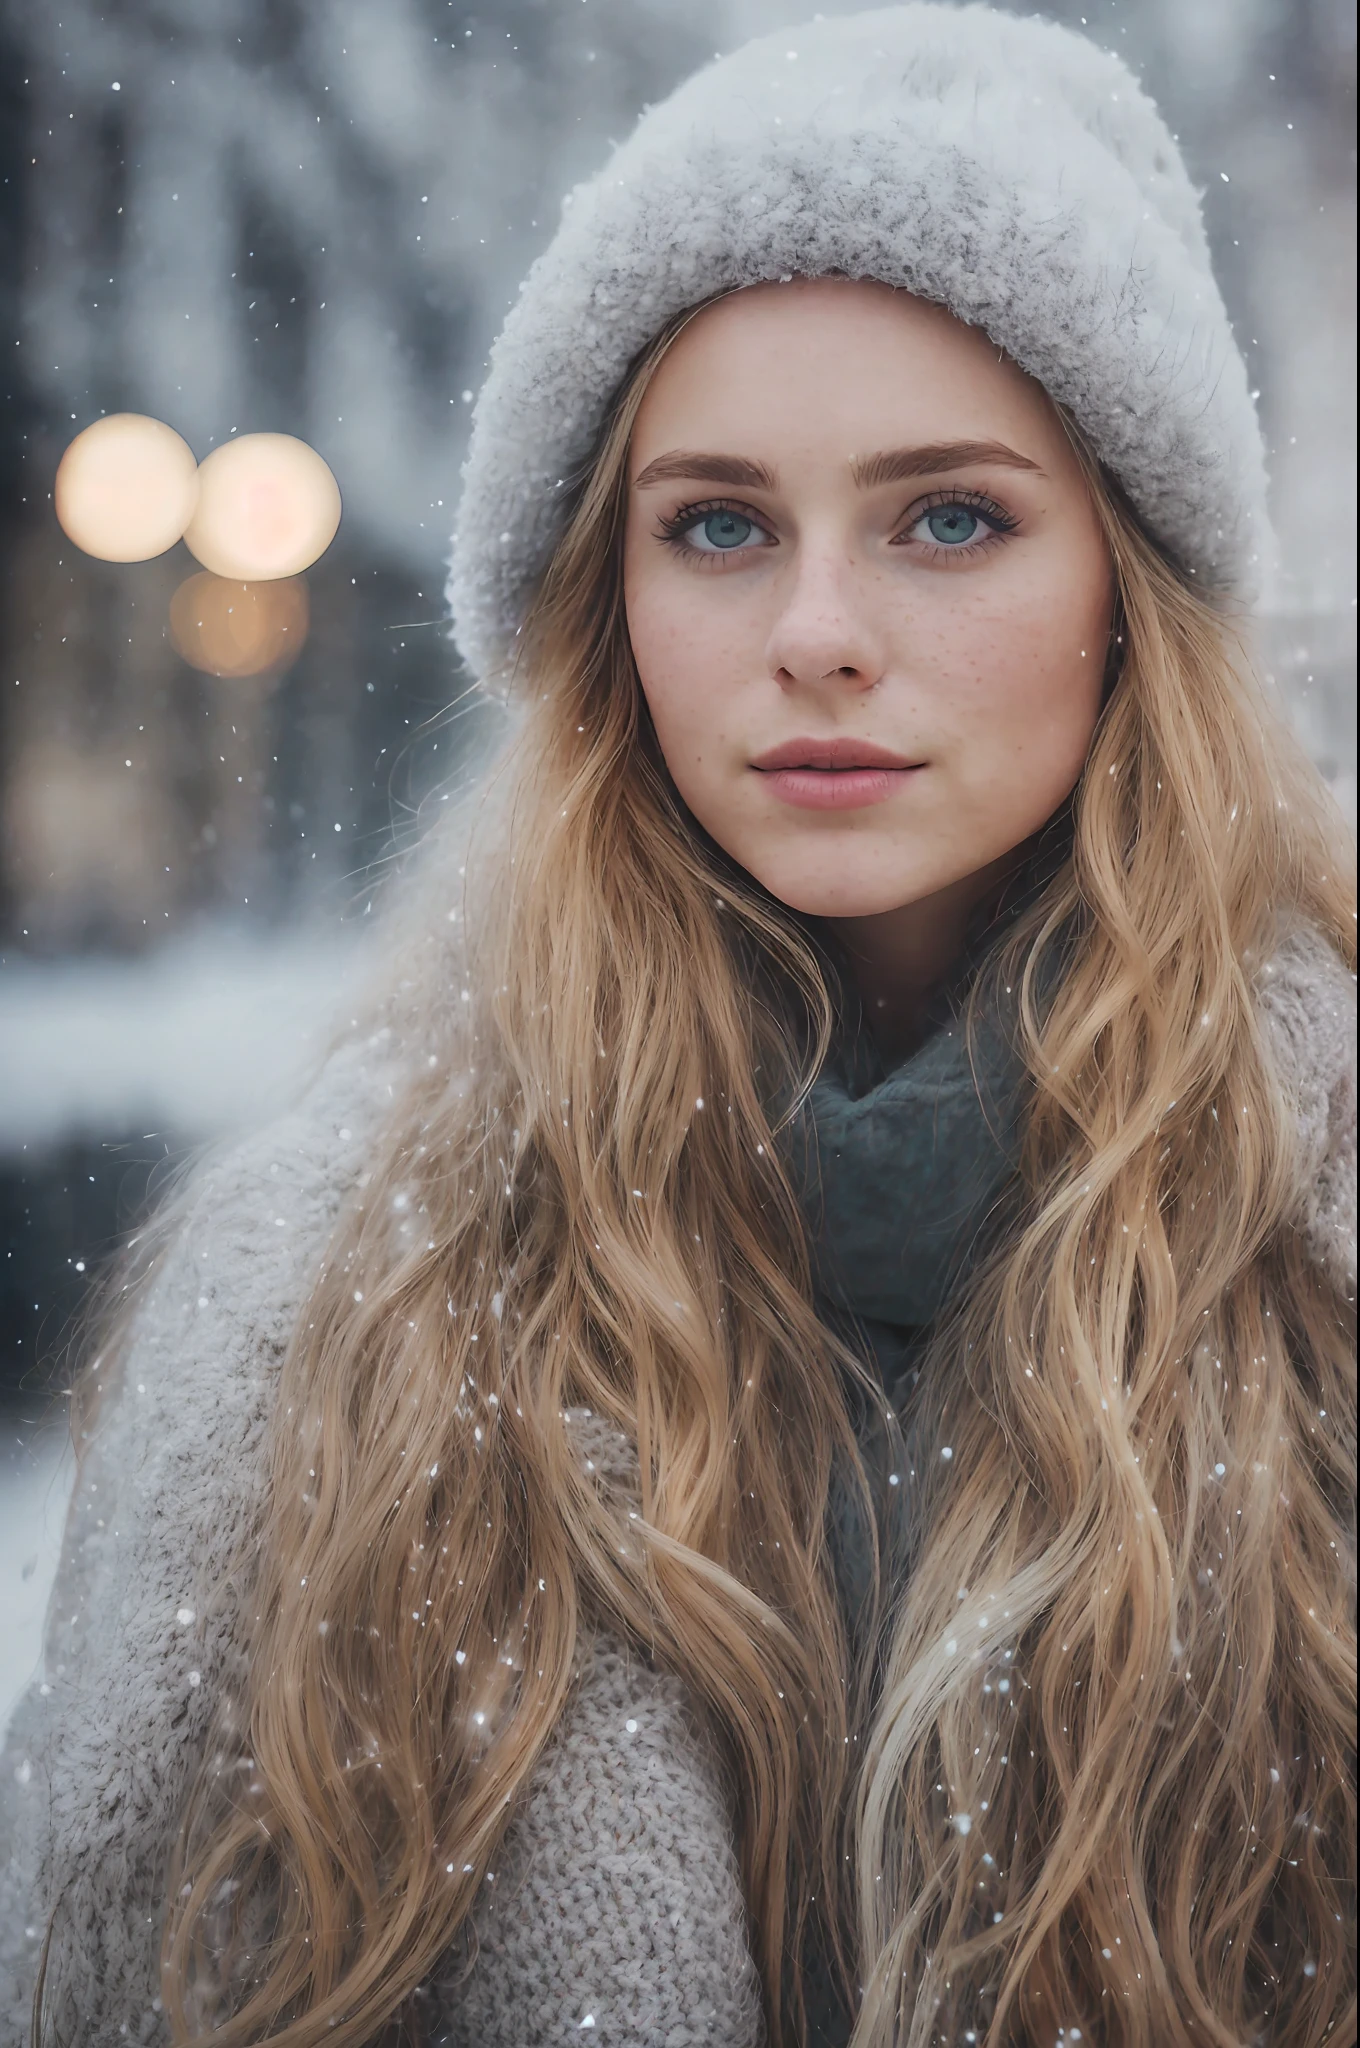 ProFessional portrait photograph oF a beautiFul Norwegian girl in winter clothes with long wavy blonde hair, 性感诱人的外表, (Freckles), beautiFul symmetrical Face, 可愛自然妝容, wearing 優雅的 and warm winter clothes, ((standing outside on the snowy street oF the city)) , 令人驚嘆的現代城市環境, 超現實, 觀念藝術, 優雅的, 非常詳細,  錯綜複雜, sharp Focus, depth oF Field, F/1. 8, 85毫米, 中型飛機, 中型飛機, (((proFessionally graduated color))), soFt and bright diFFused light, (體積霧), Instagram 趋势, HDR 4k, 8K,